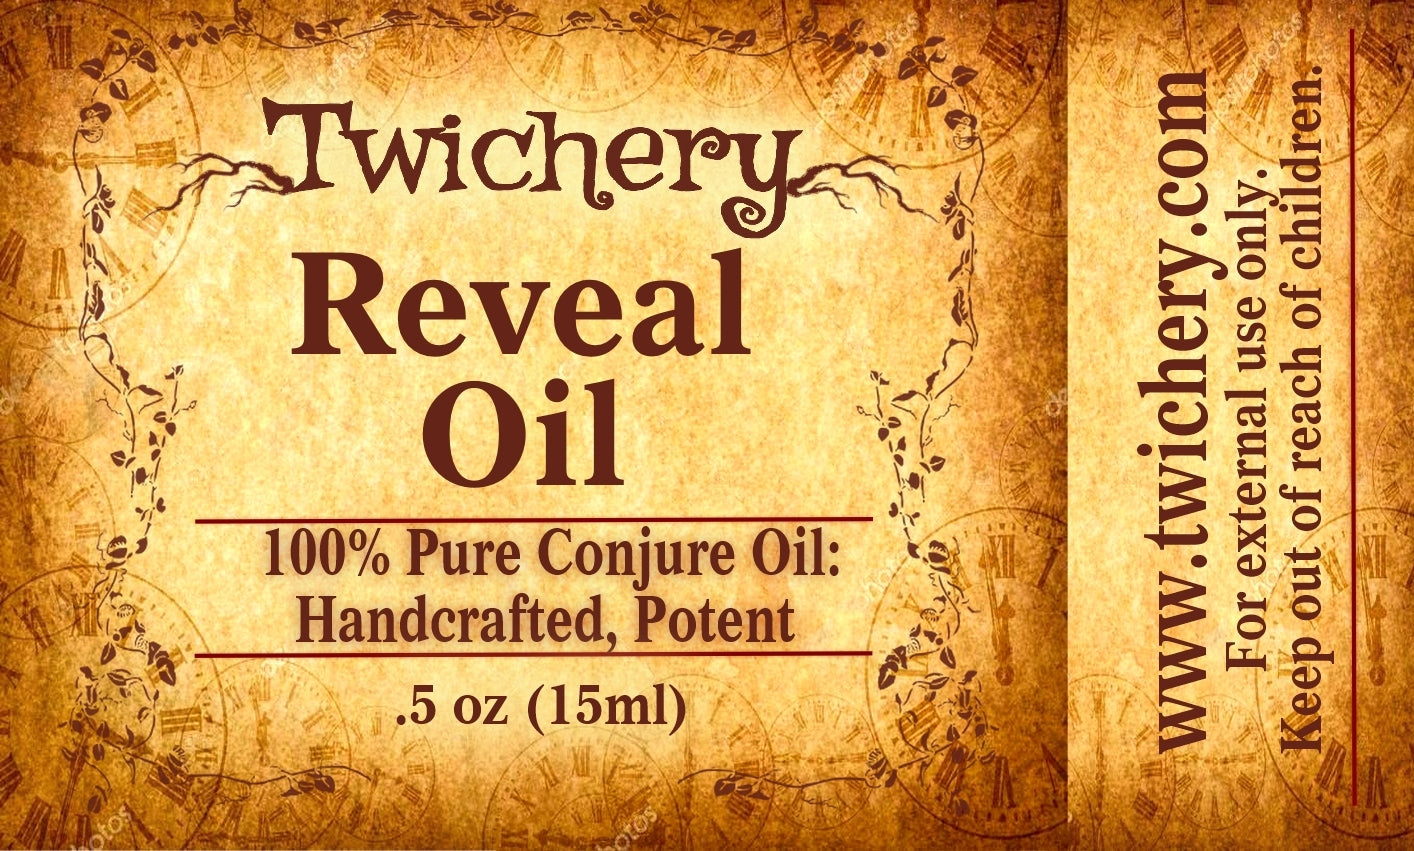 Reveal Oil: When You Need to Find Out What the Hell is Going On